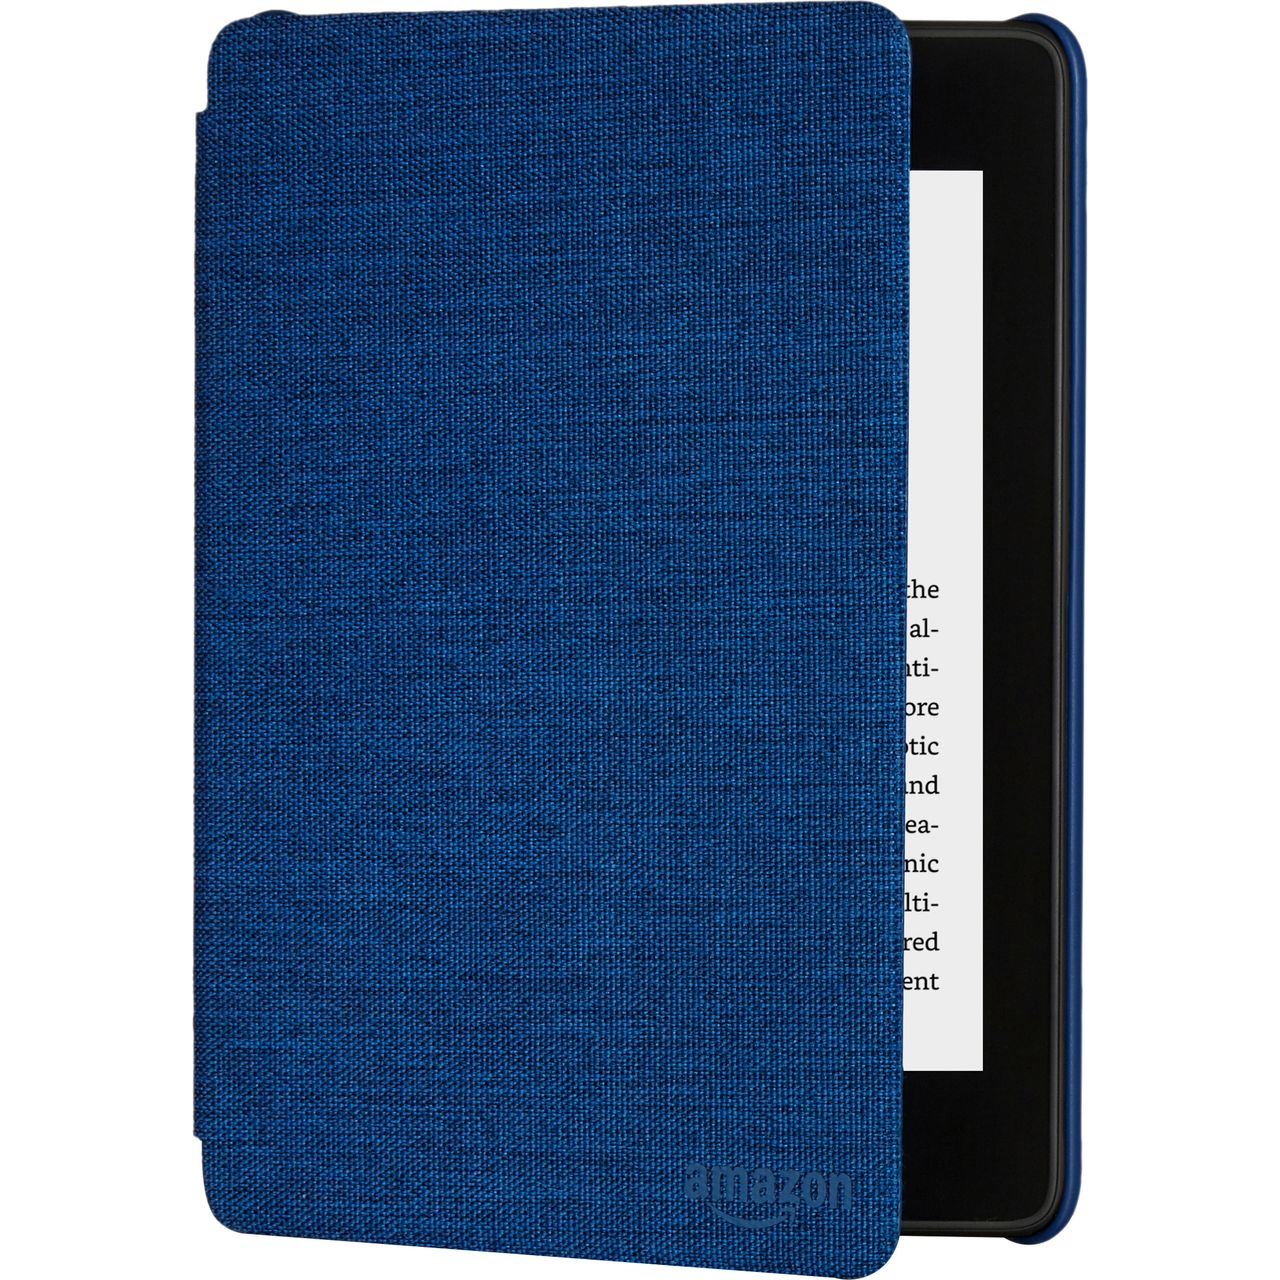 Amazon Kindle Tablet Case for 2019 Kindle Review